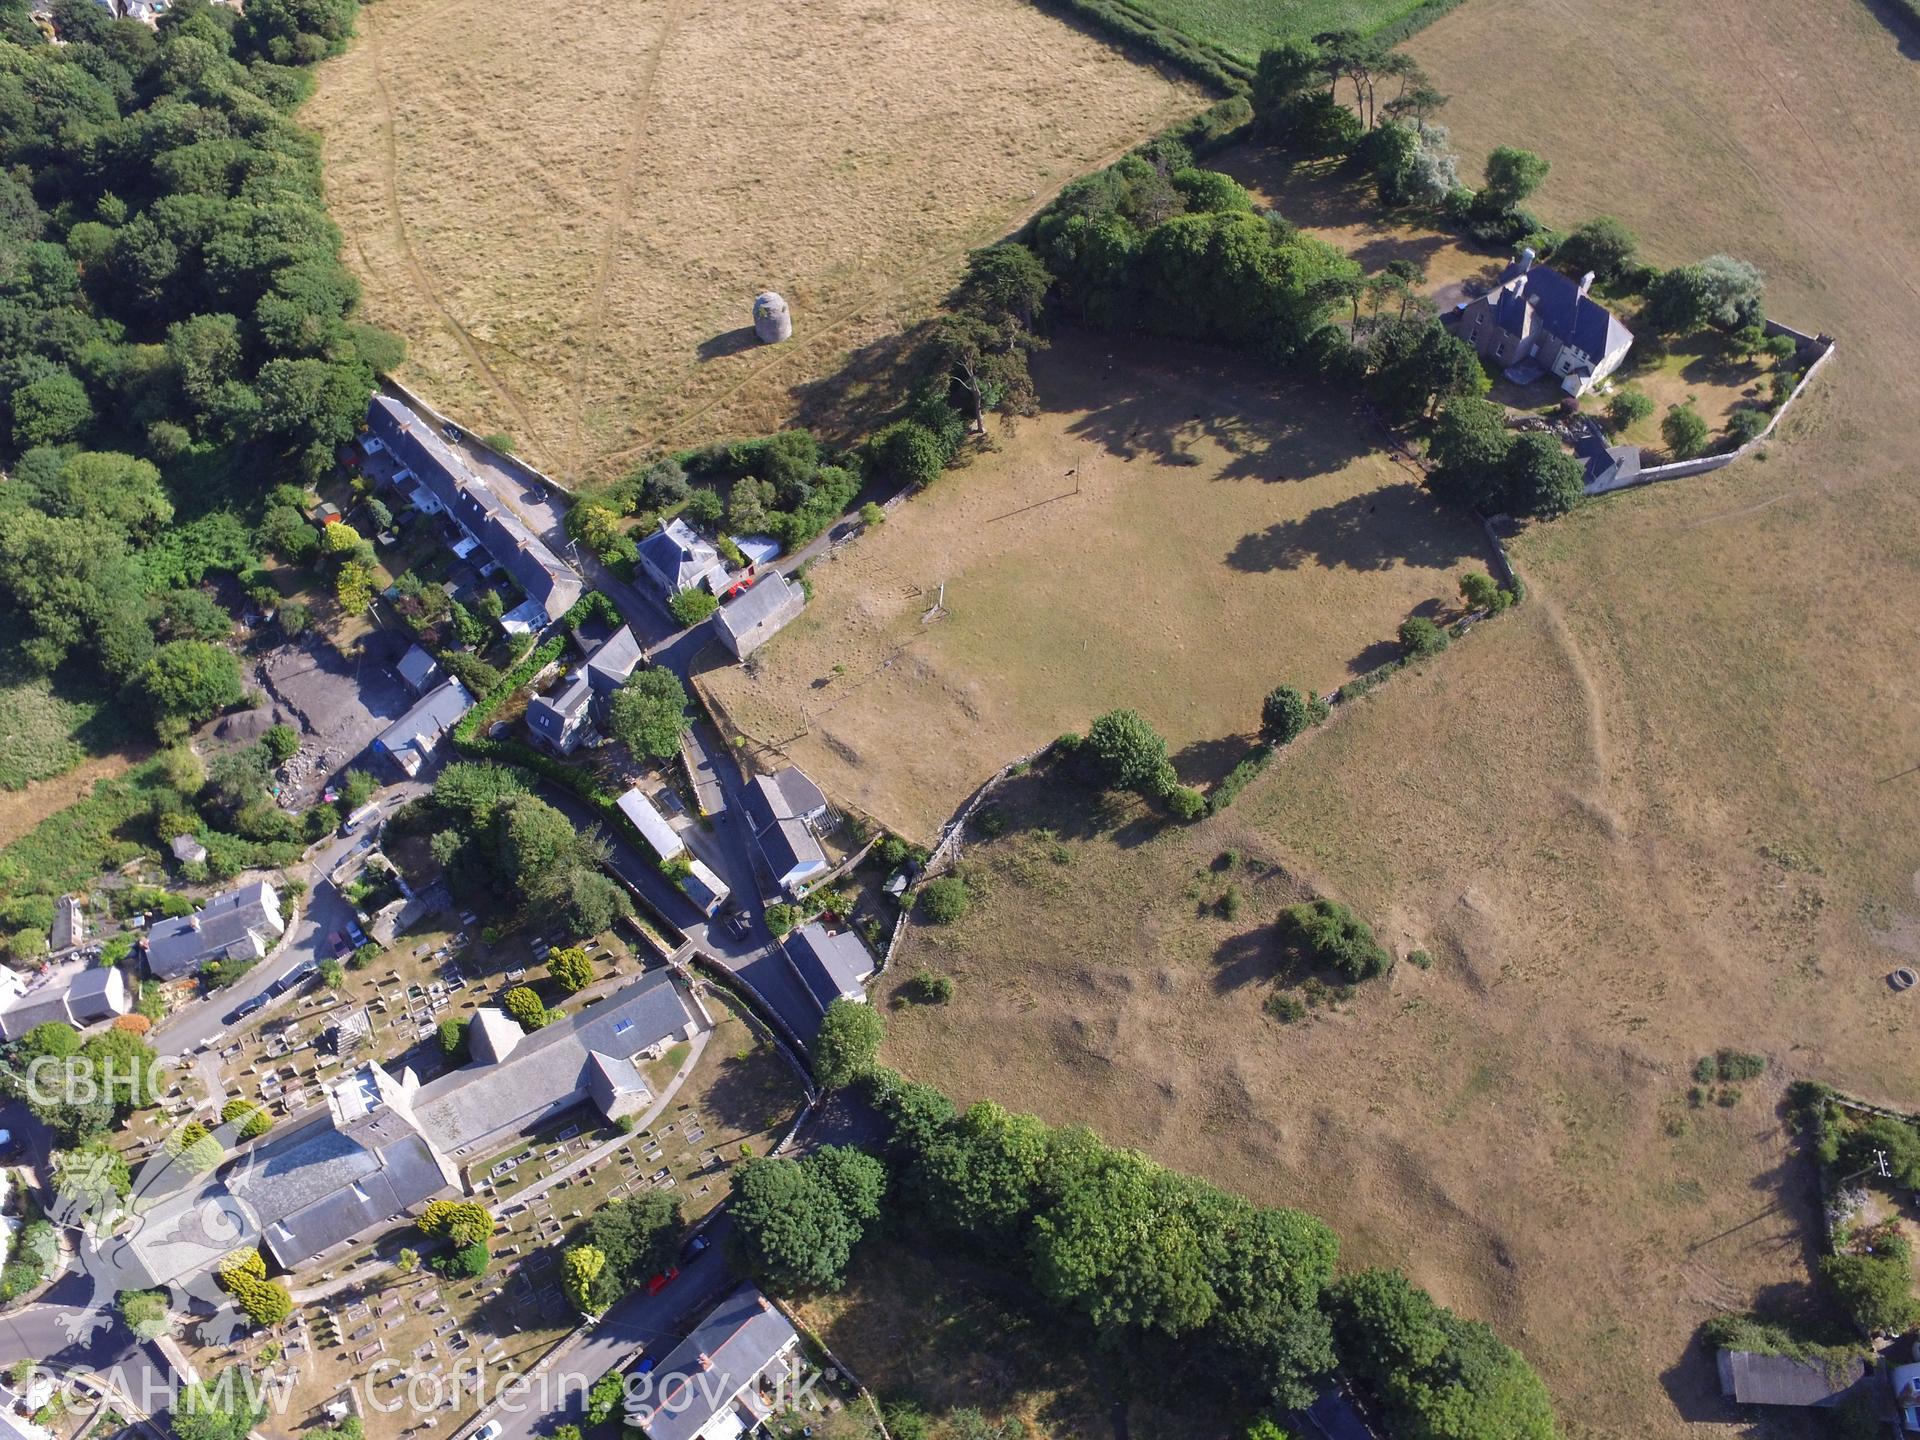 St. Illtyd's Church and the site of the Llantwit Major grange. Colour photograph taken by Paul R. Davis on 25th July 2018.